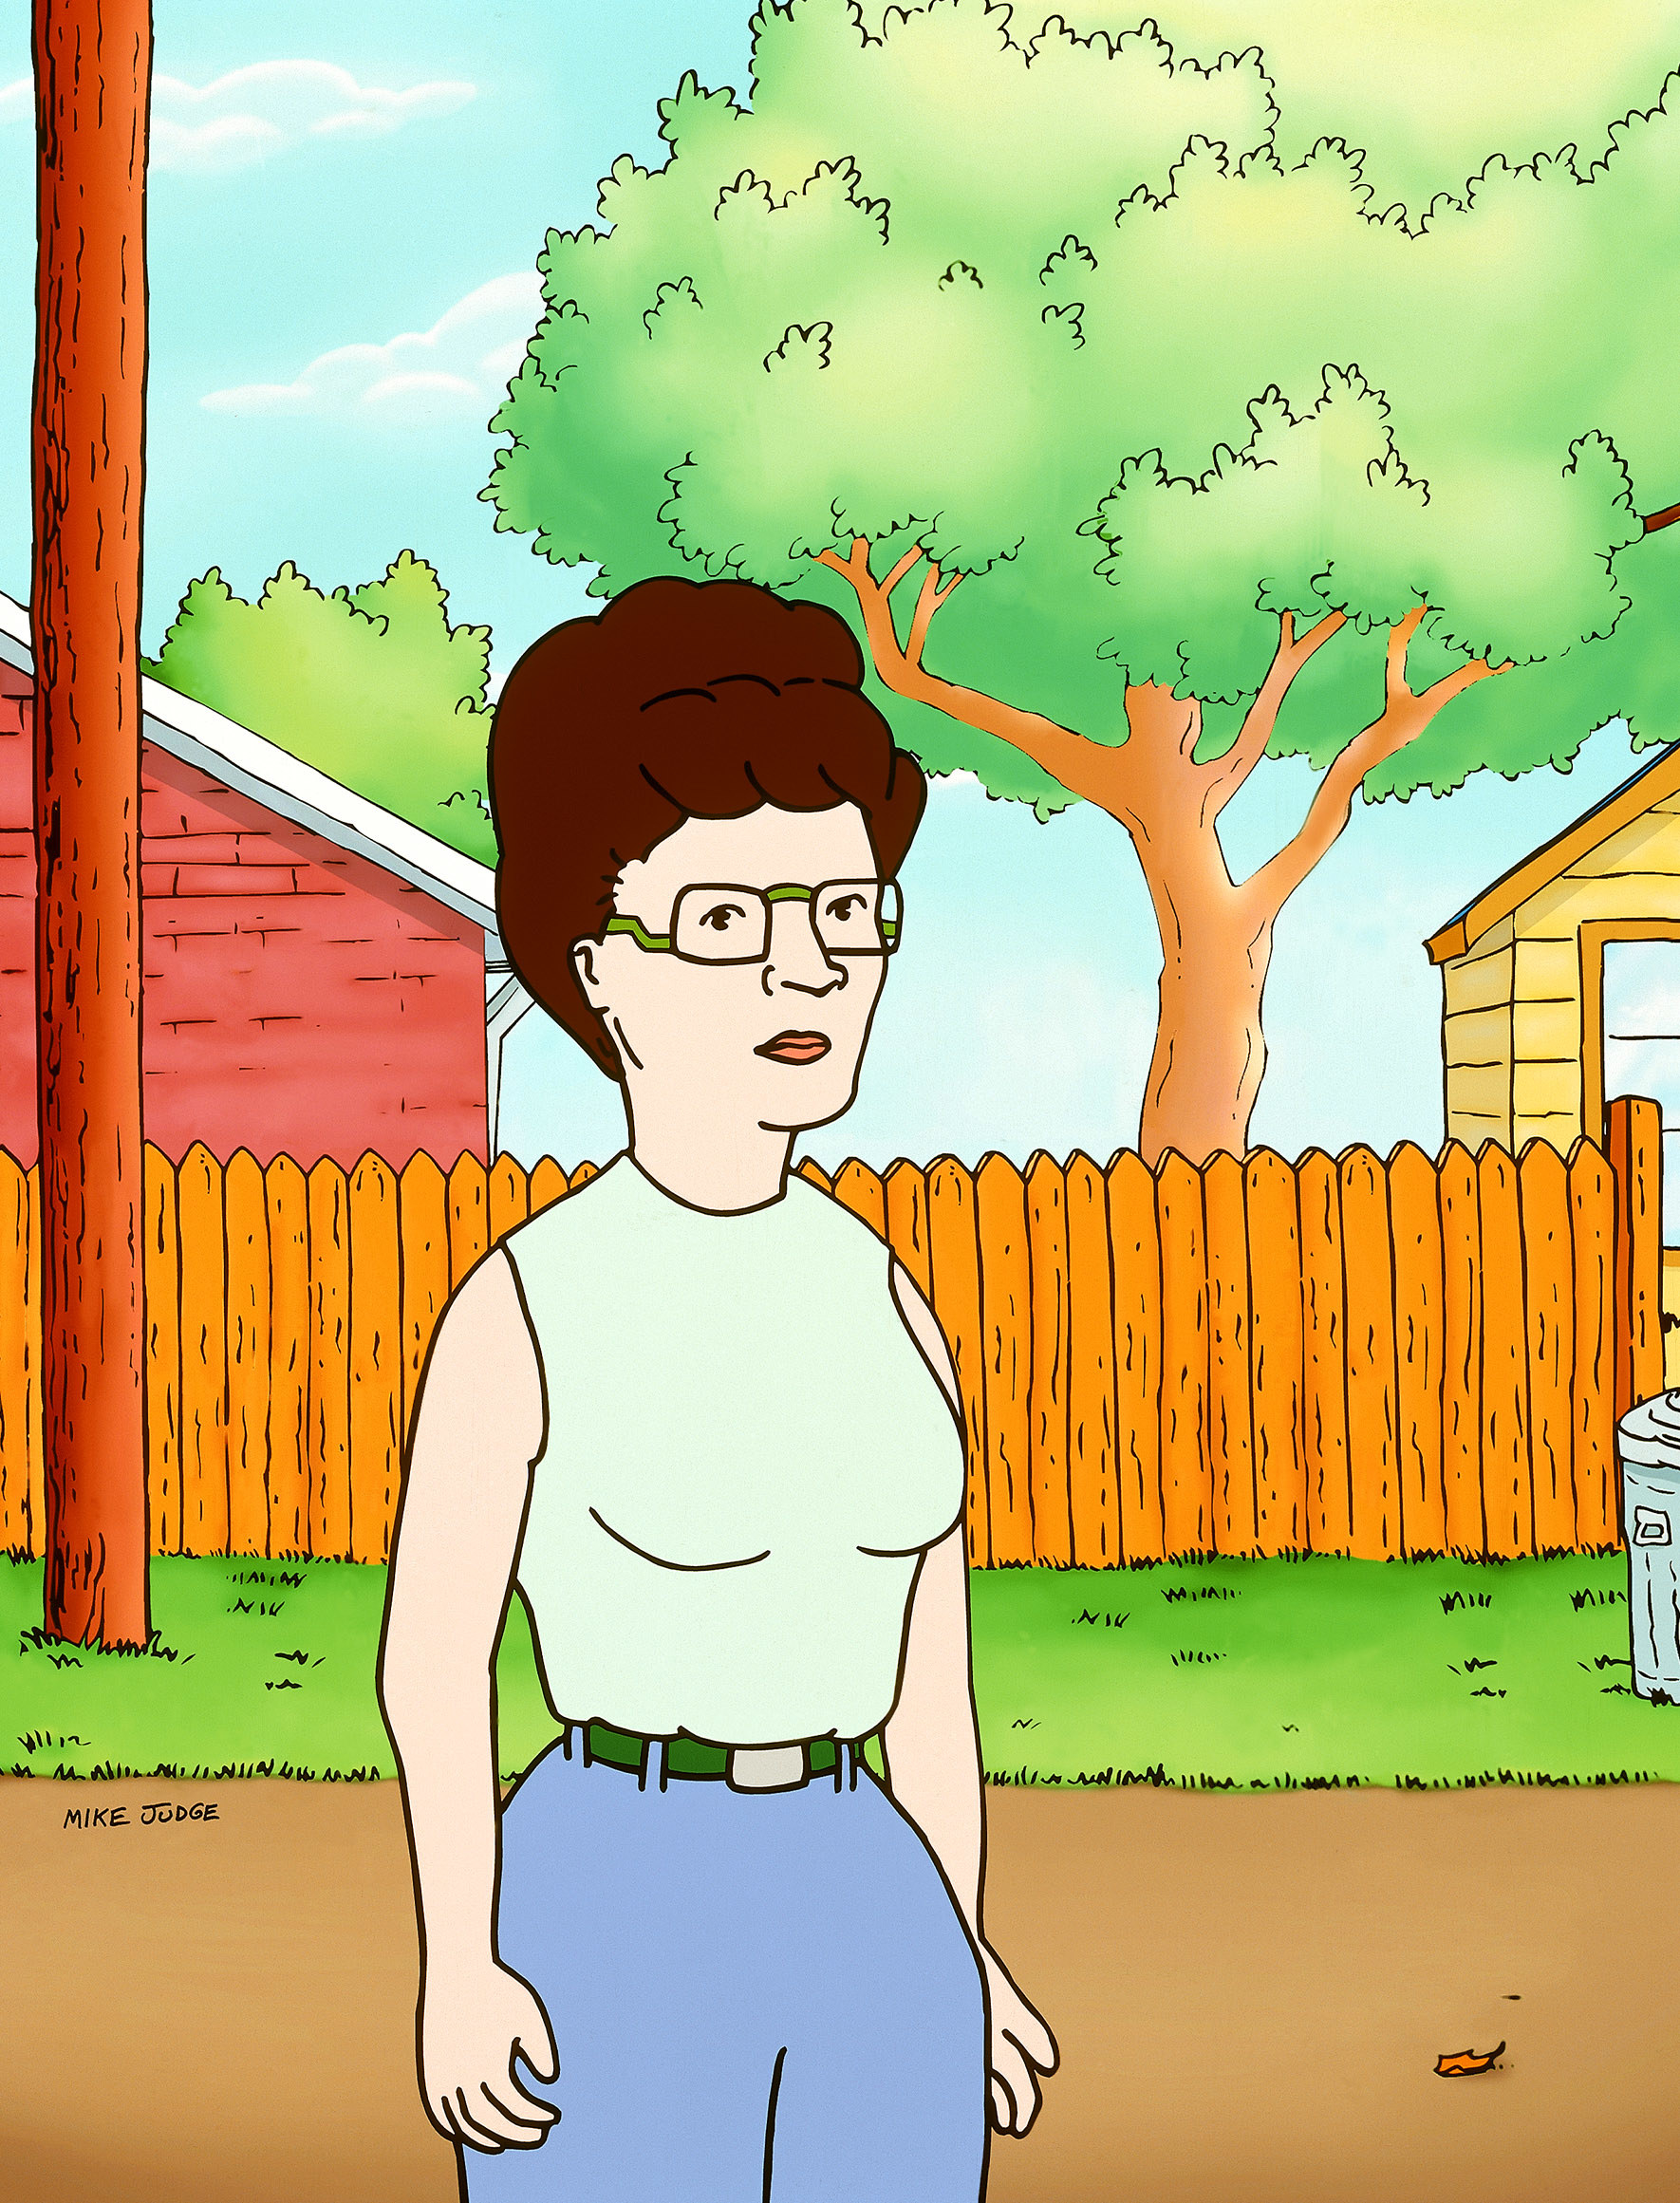 Peggy and hank hill costumes